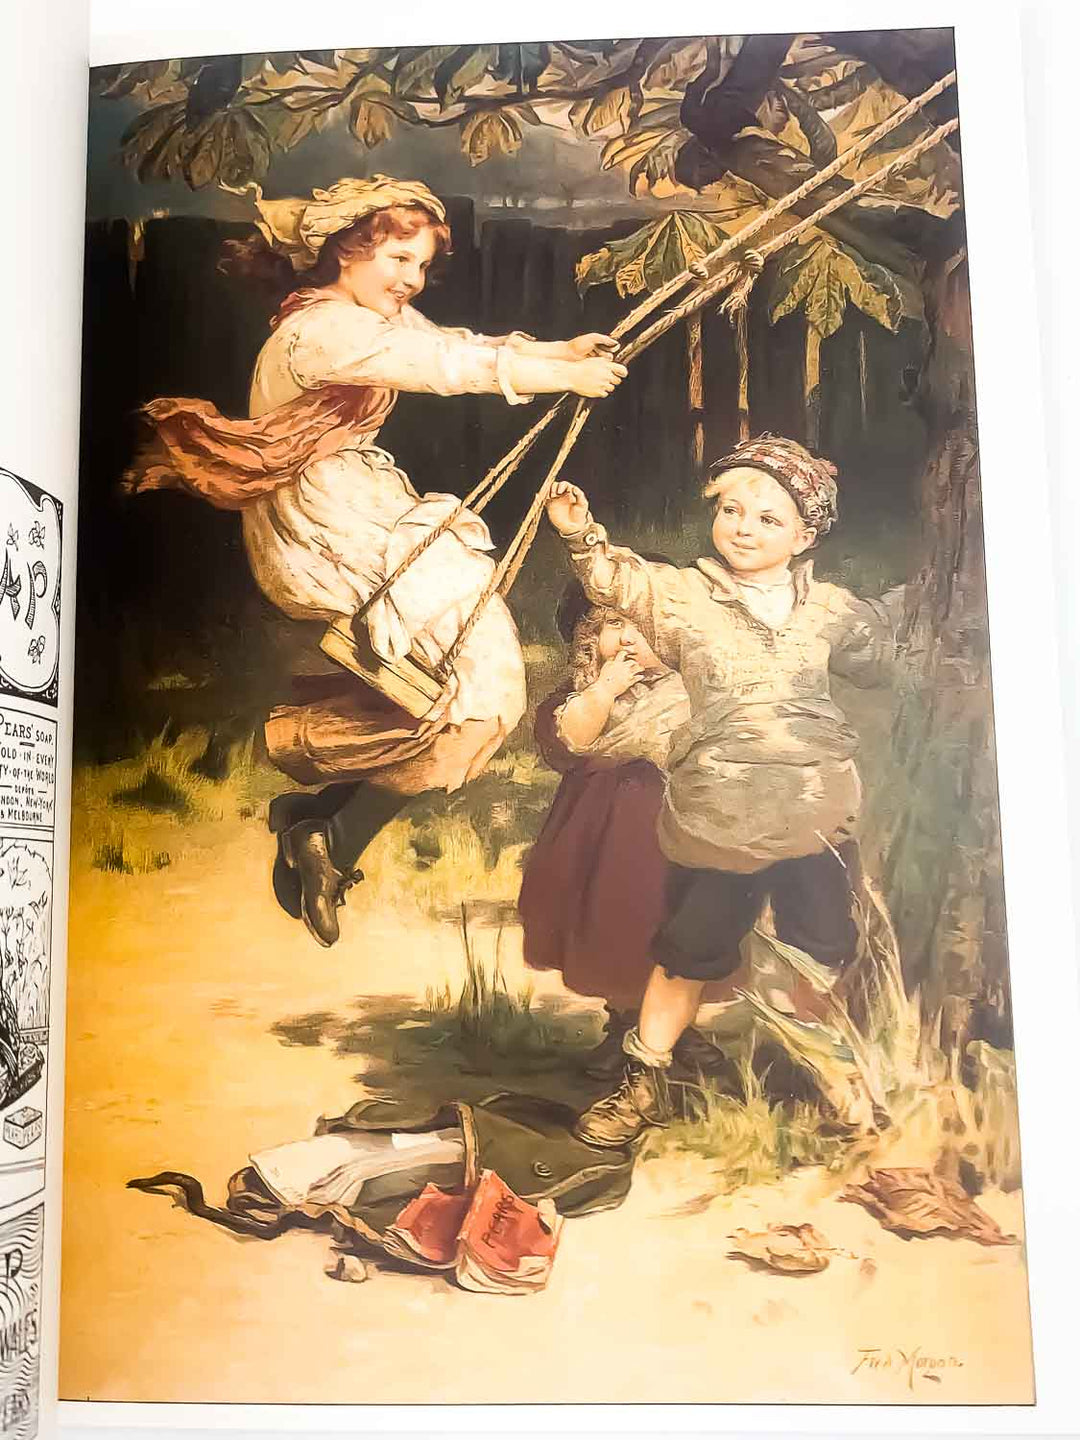 Dempsey, Michael - Bubbles: Early Advertising Art from A.& F.Pears, Ltd.